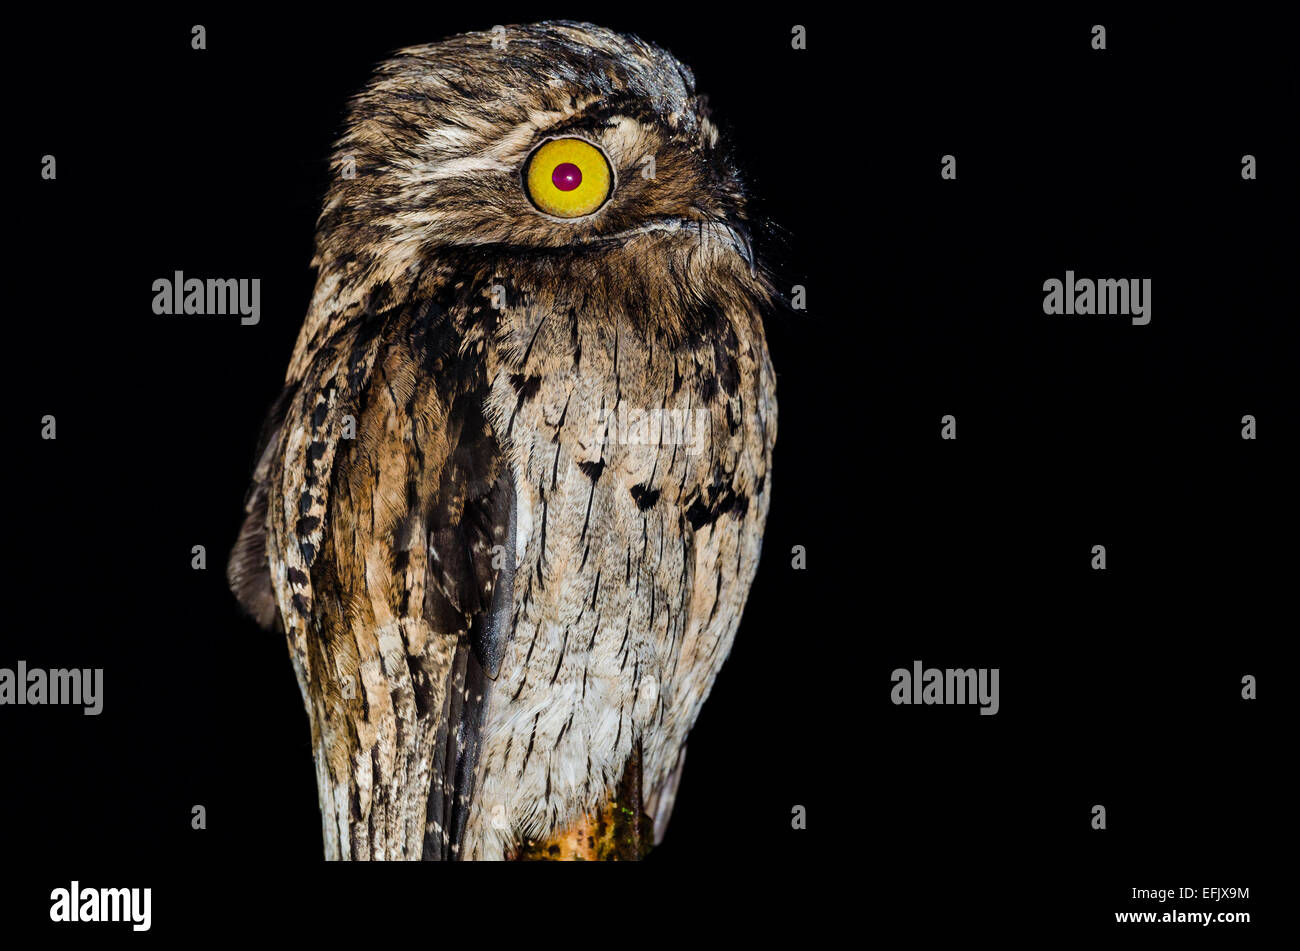 A Northern Potoo (Nyctibius jamaicensis) at night. Belize, Central America. Stock Photo